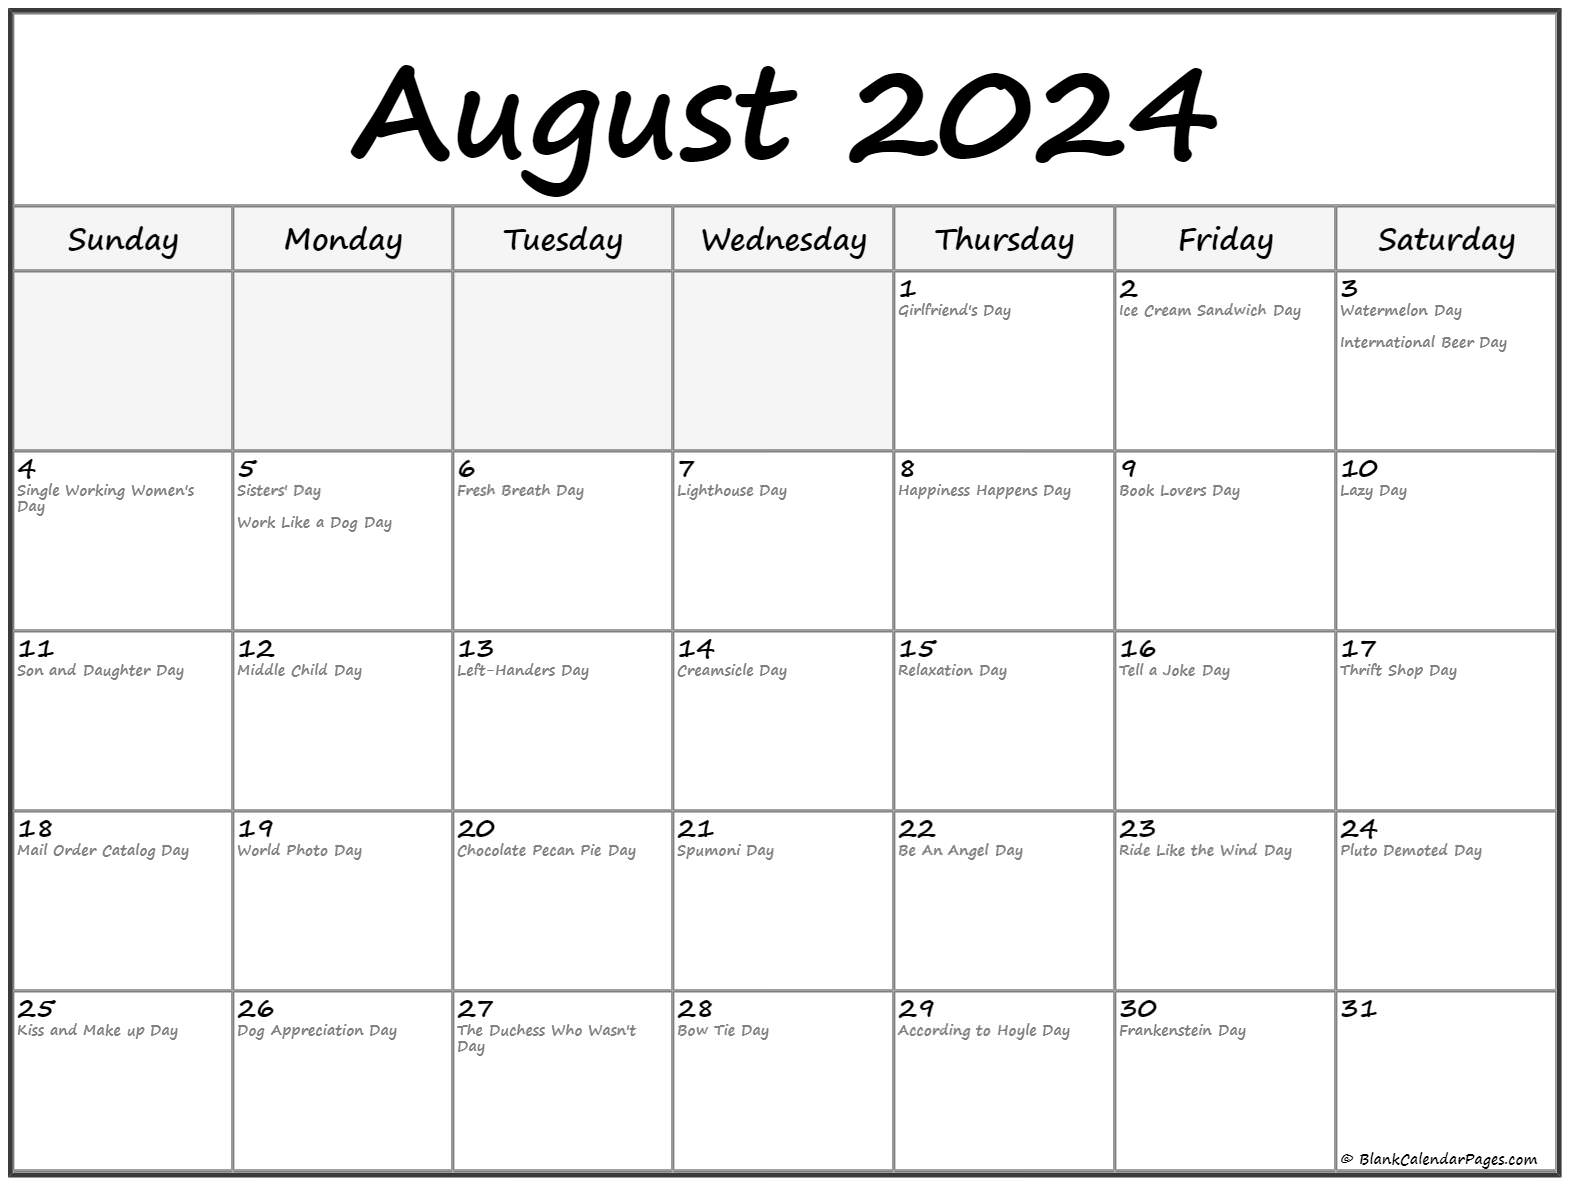 Collection Of August 2020 Calendars With Holidays